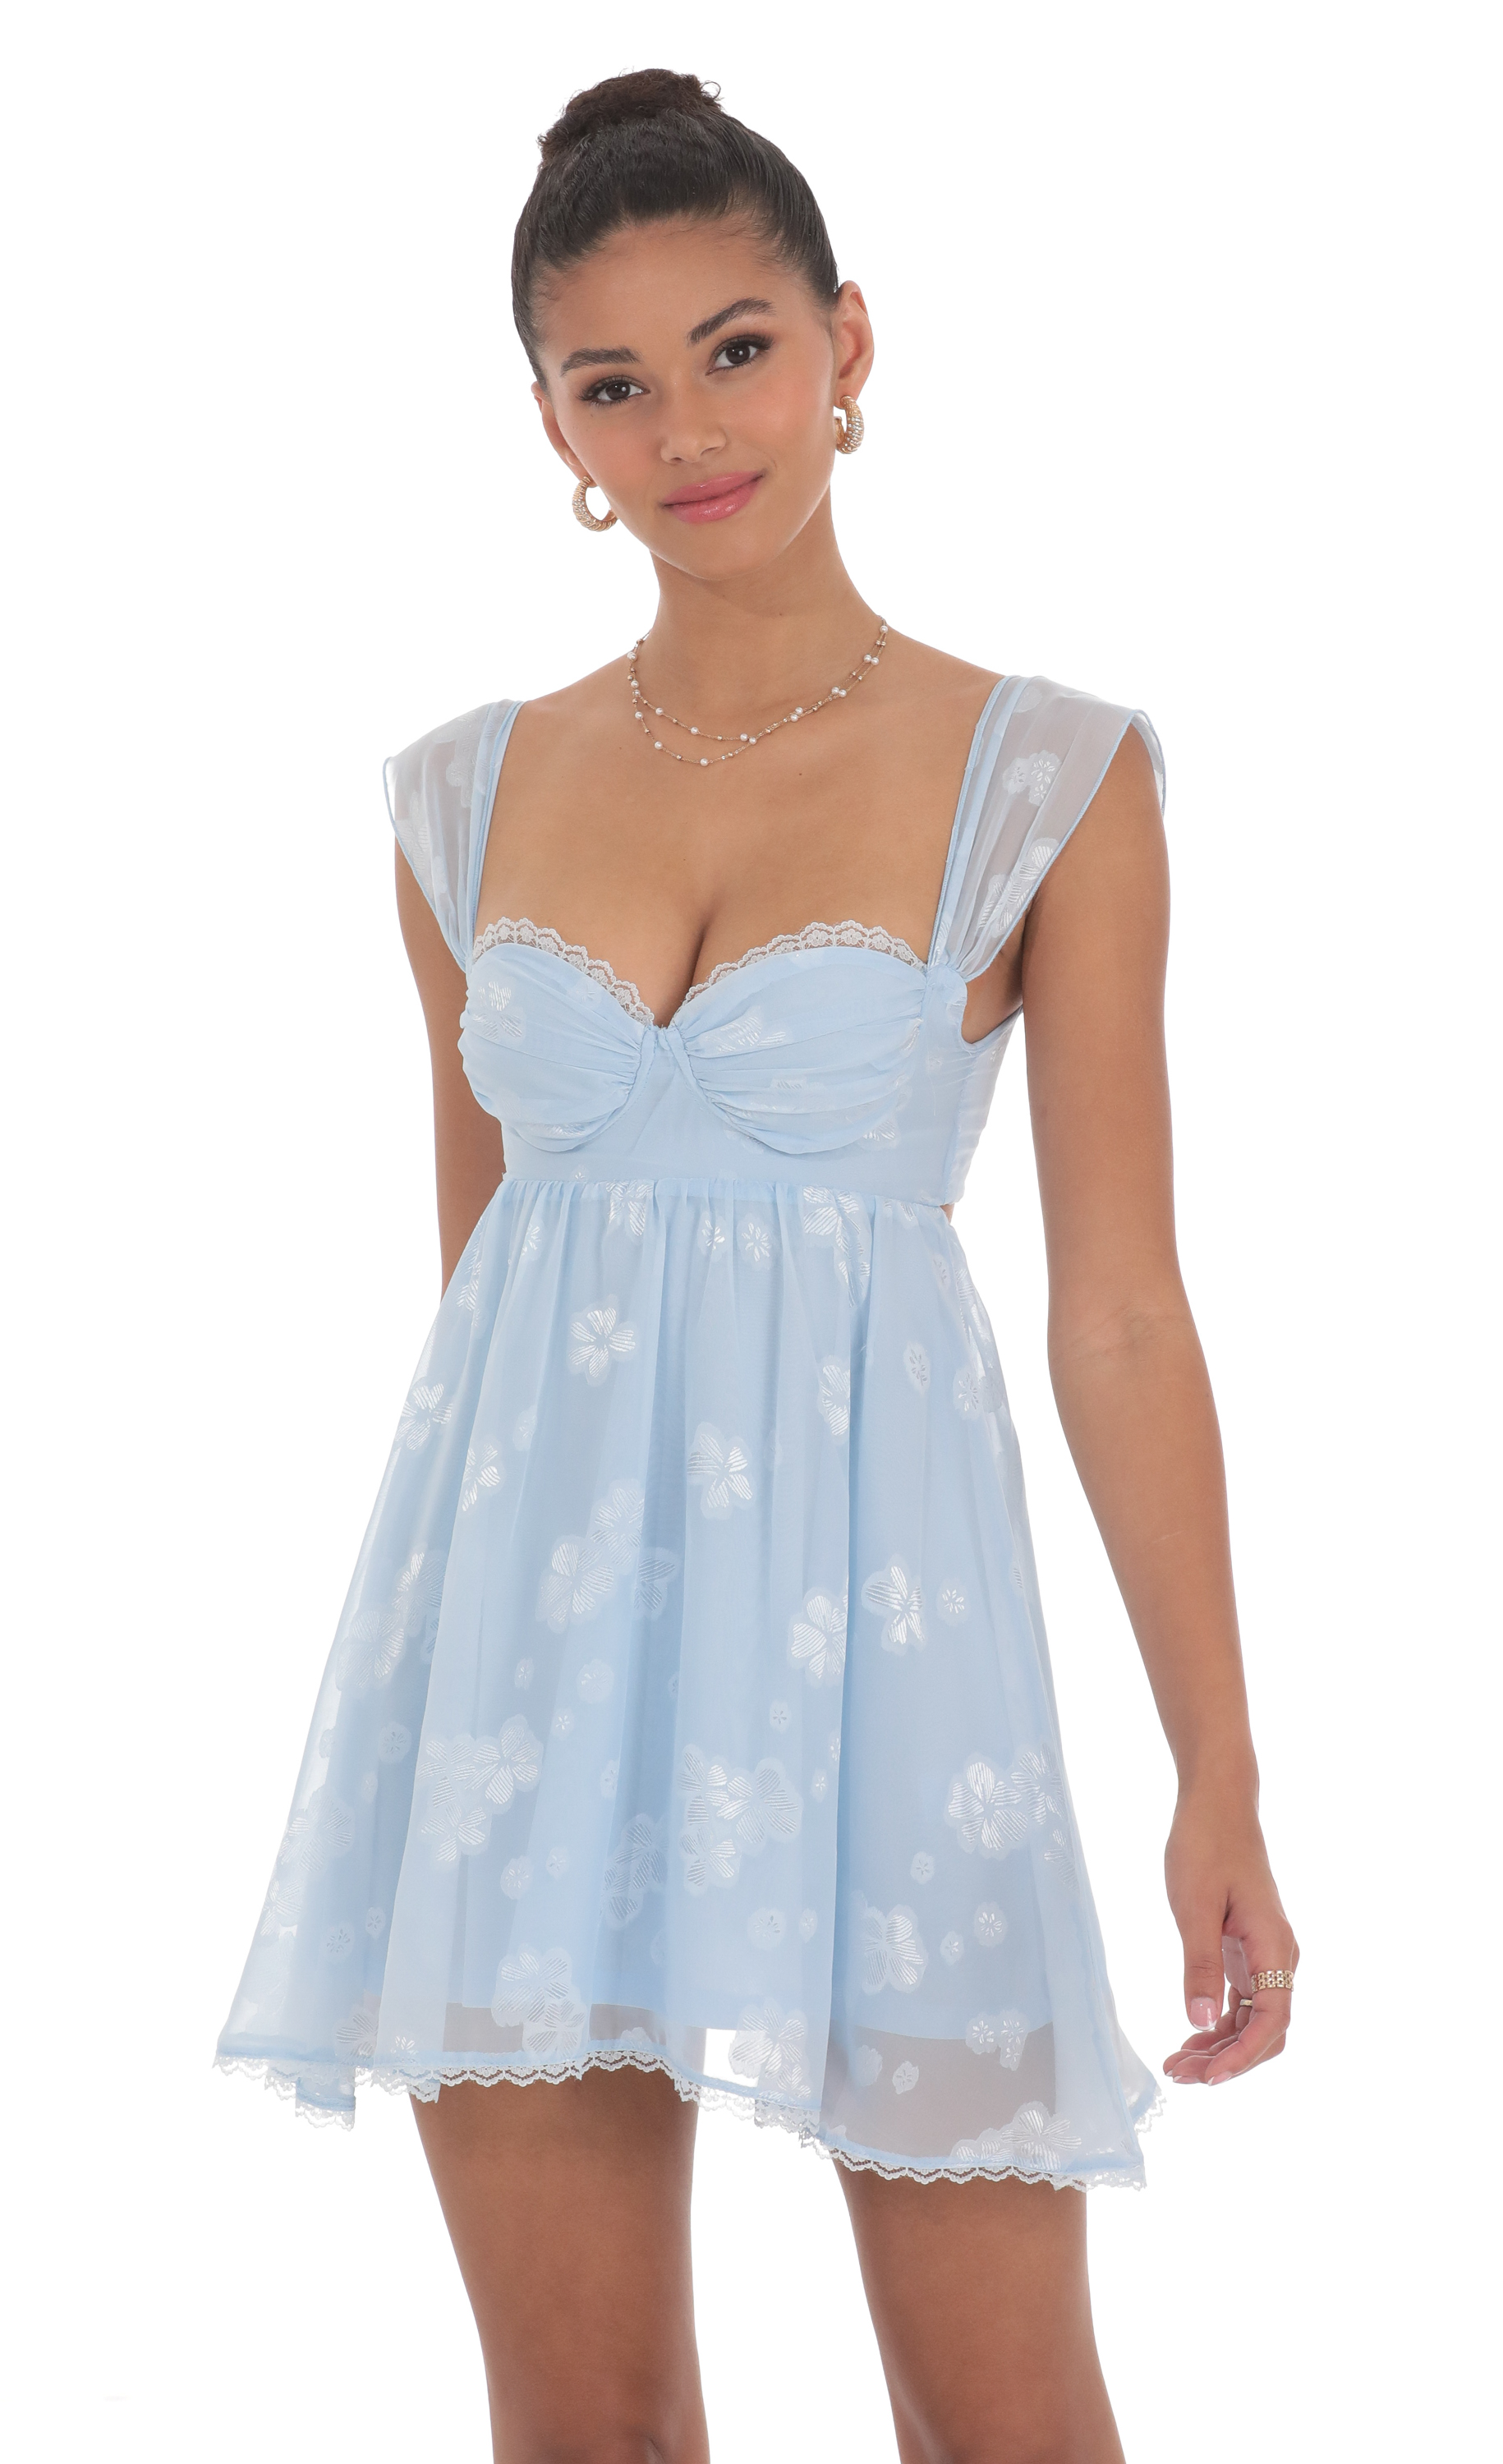 Embroidered Trim Floral Babydoll Dress in Baby Blue